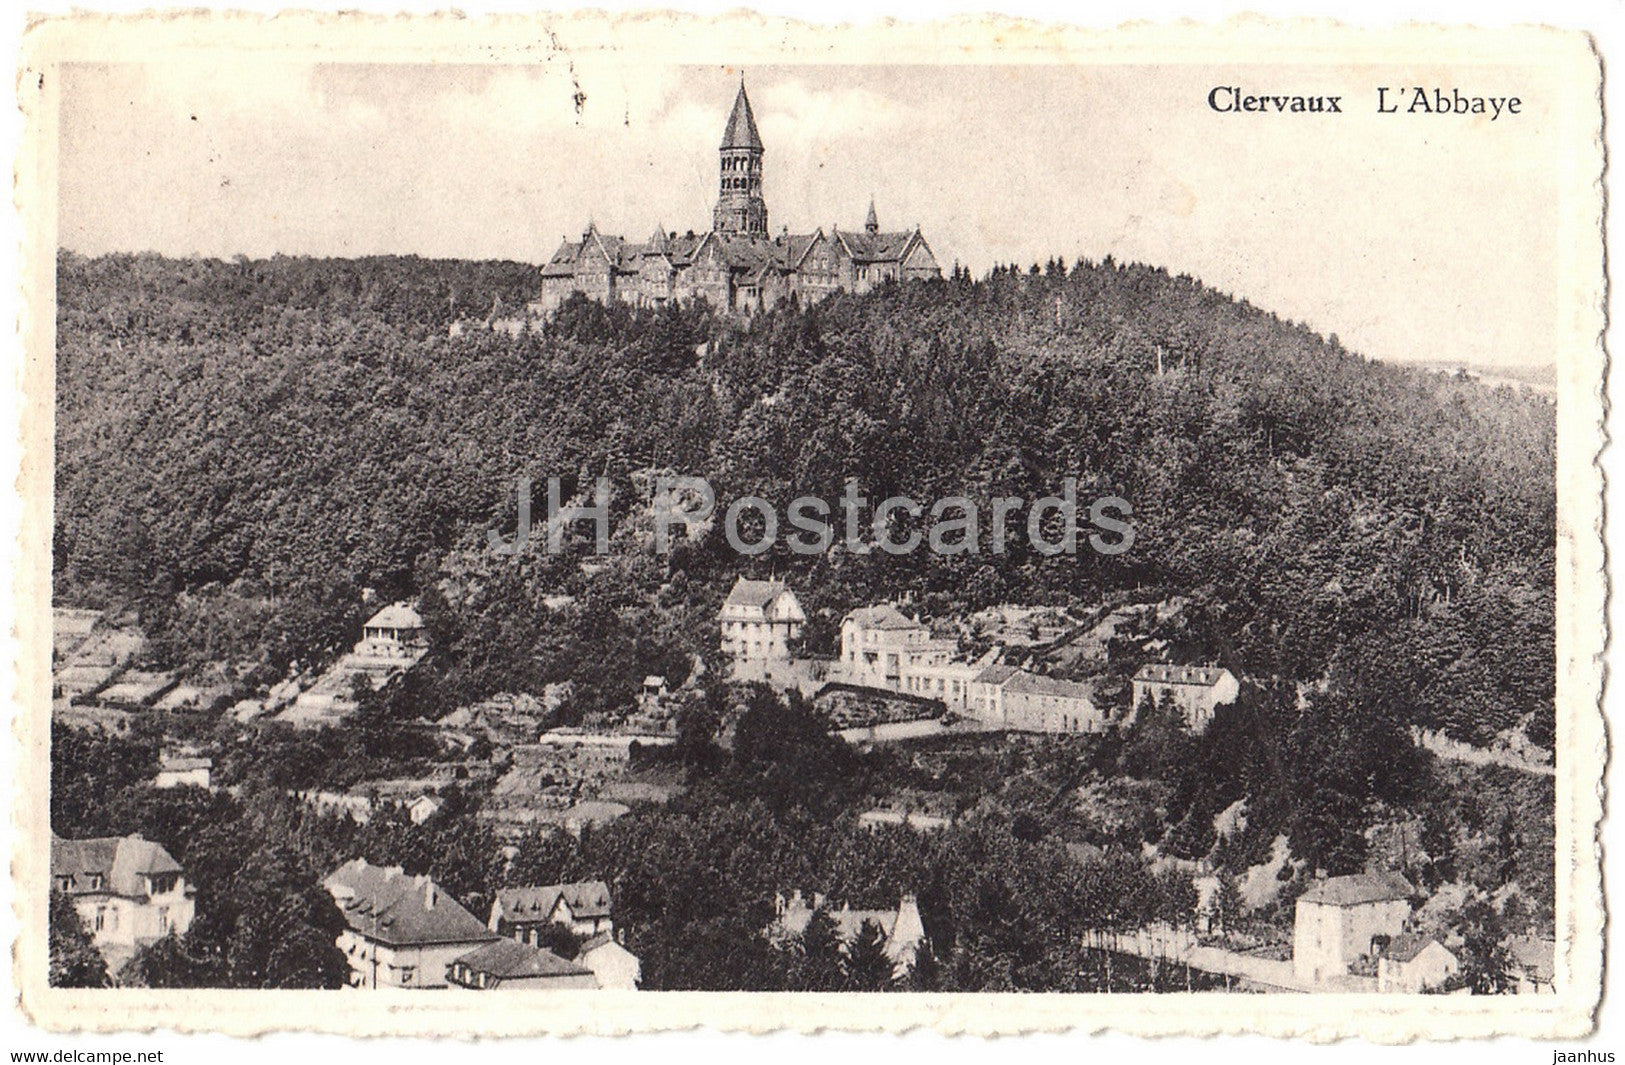 Clervaux - L'Abbaye - Pierre Kanser - 262 - old postcard - 1949 - Luxembourg - used - JH Postcards